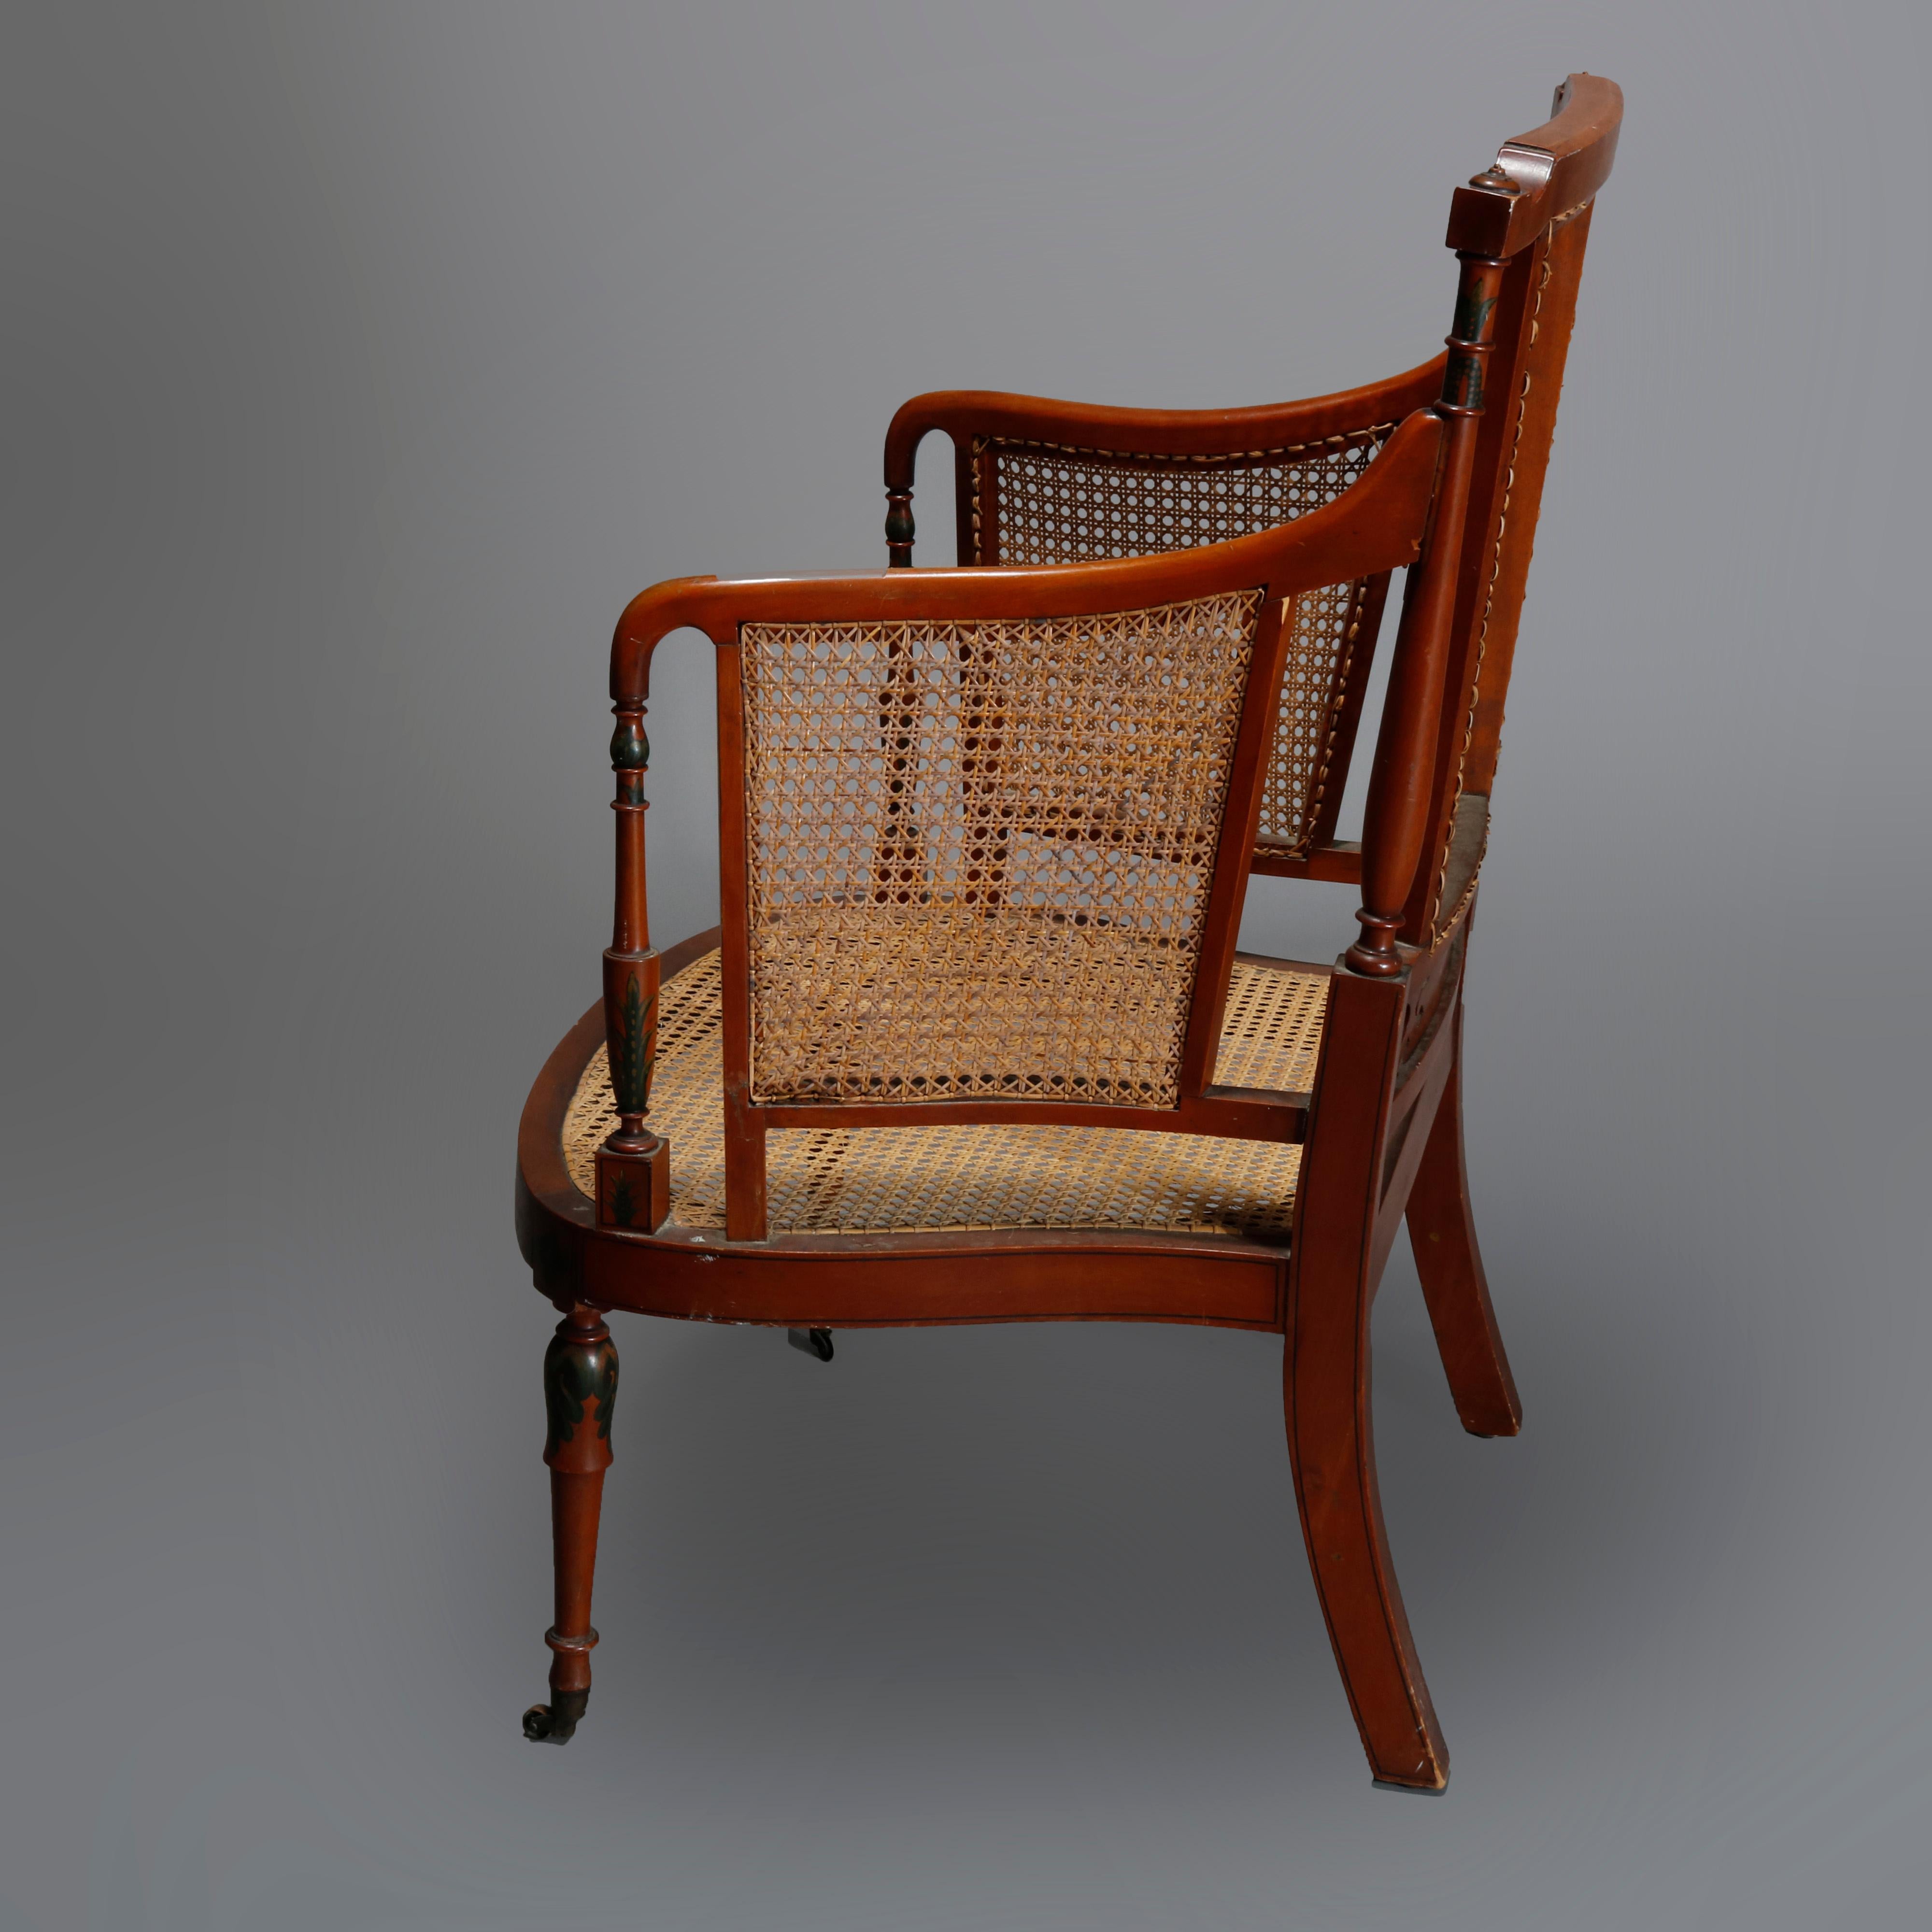 Antique Adams Decorated Satinwood & Cane Lolling Chair, 20th C For Sale 2